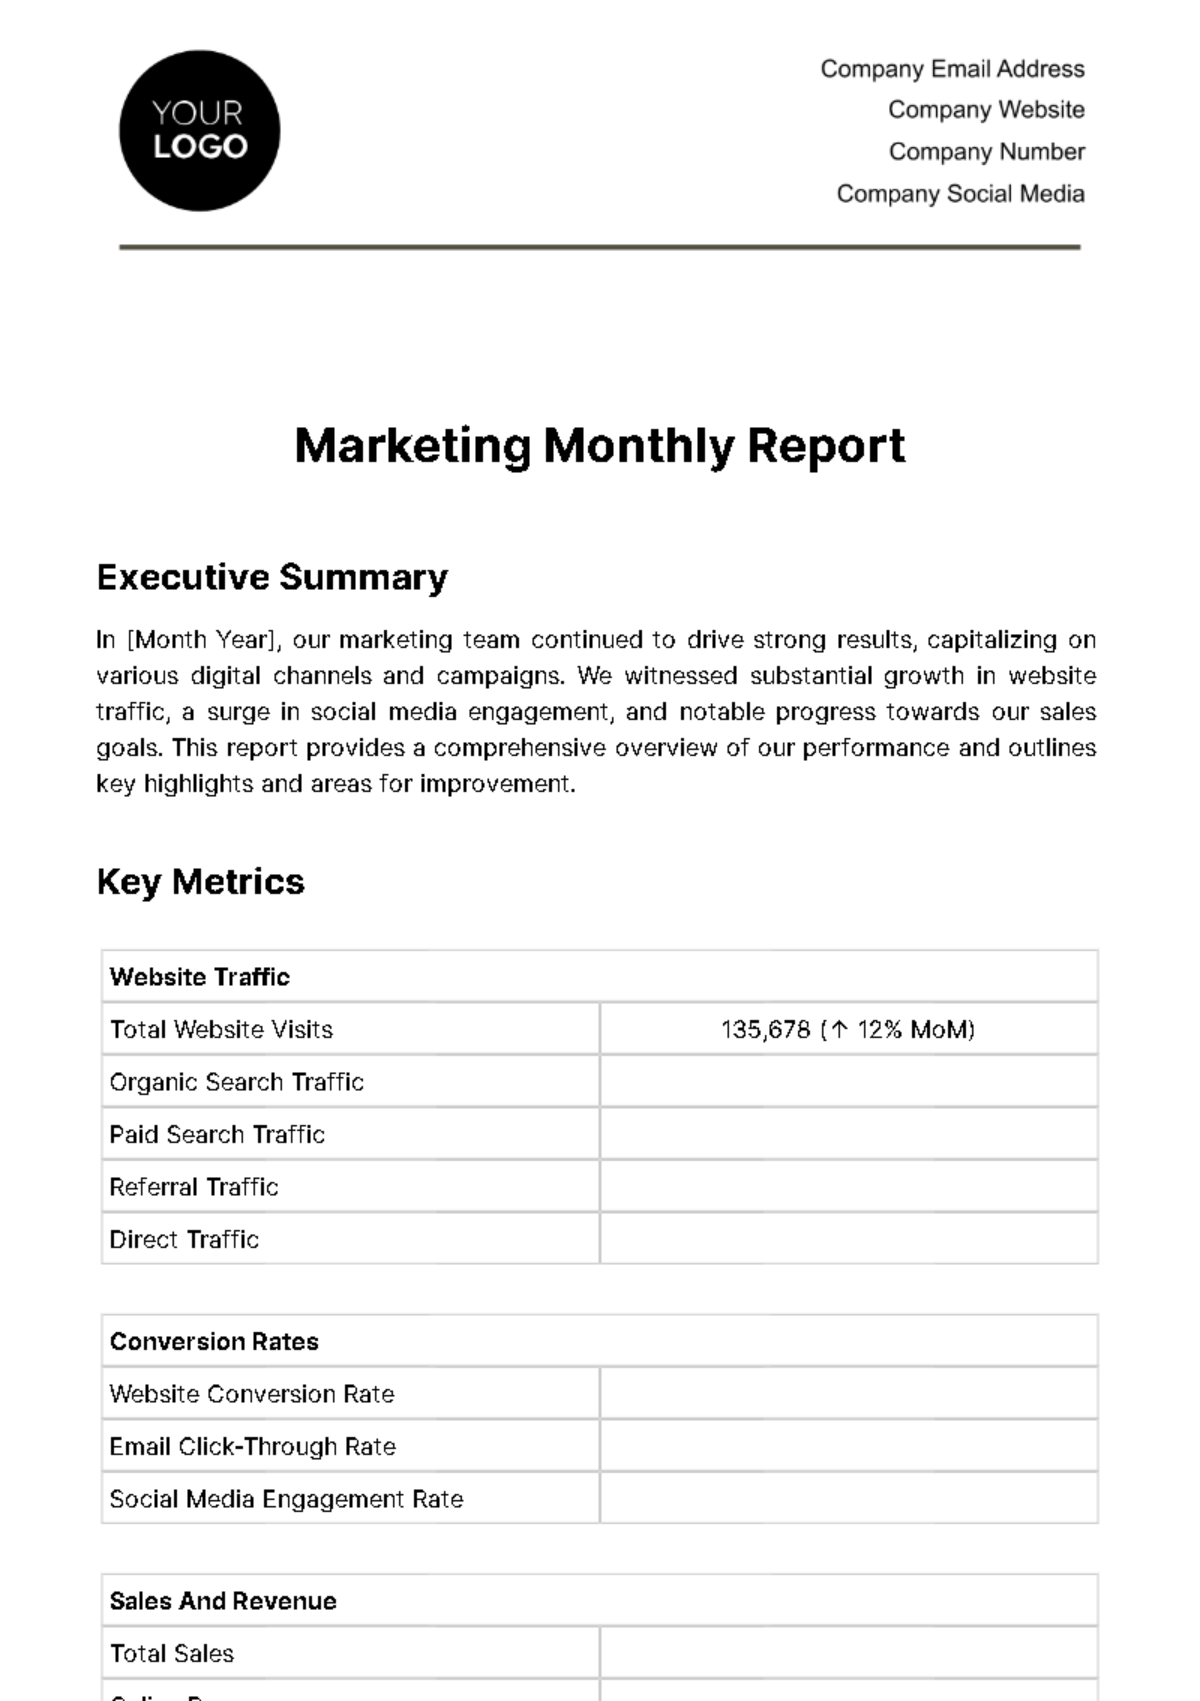 Marketing Monthly Report Template